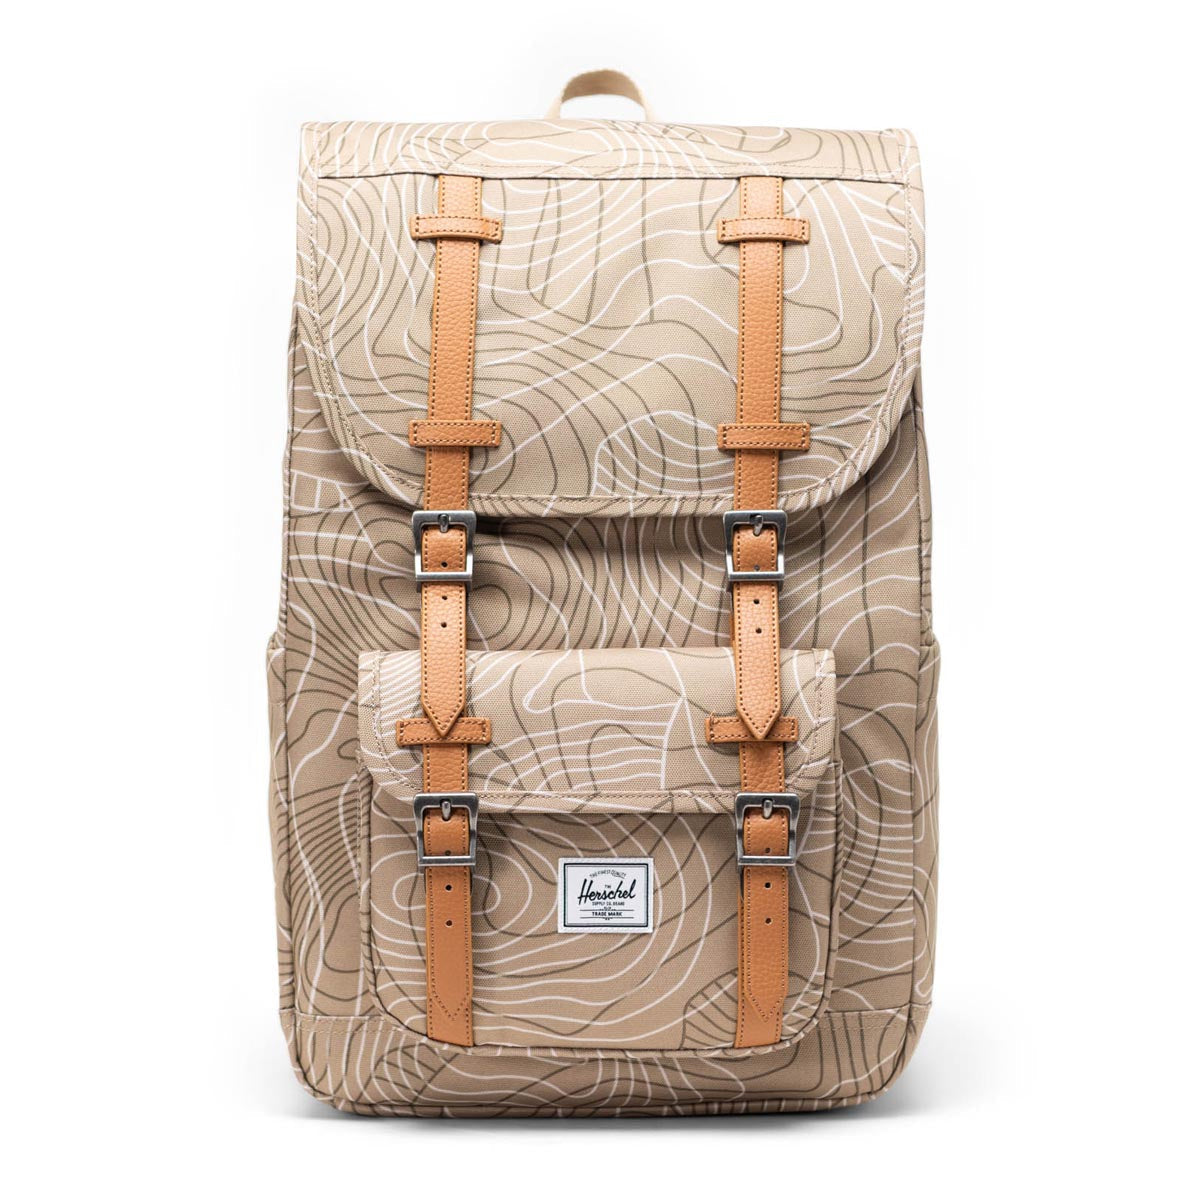 Herschel Supply Little America Mid Backpack - Twill Topography image 1